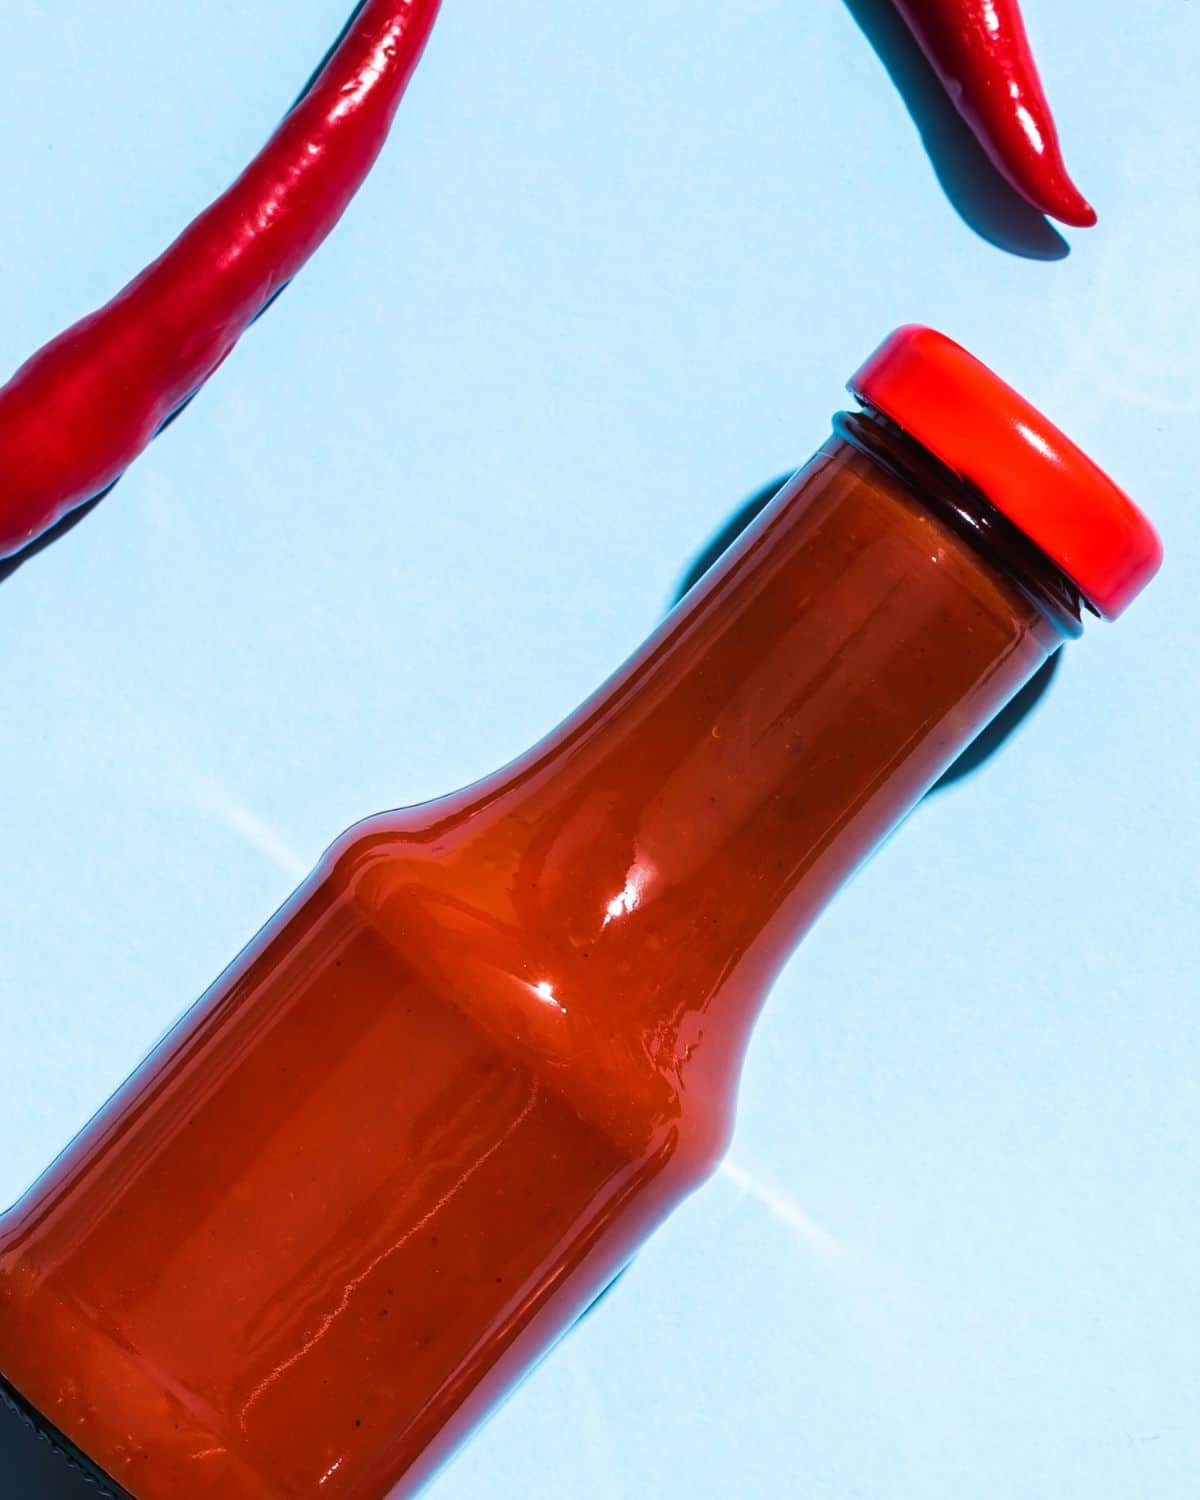 A bottle of ketchup with chilies near it.